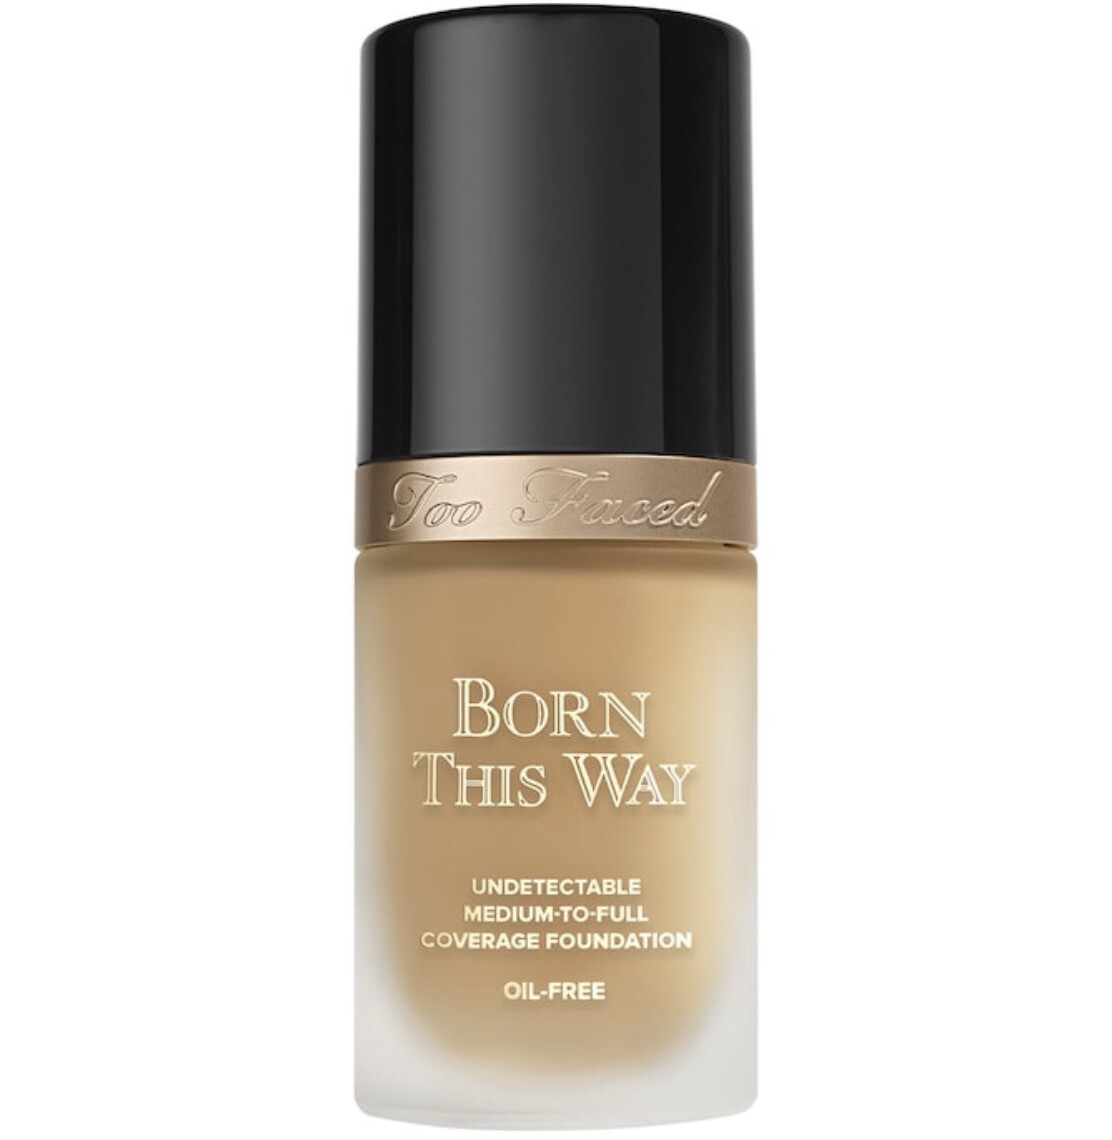 Too Faced - Born This Way Foundation | Sand